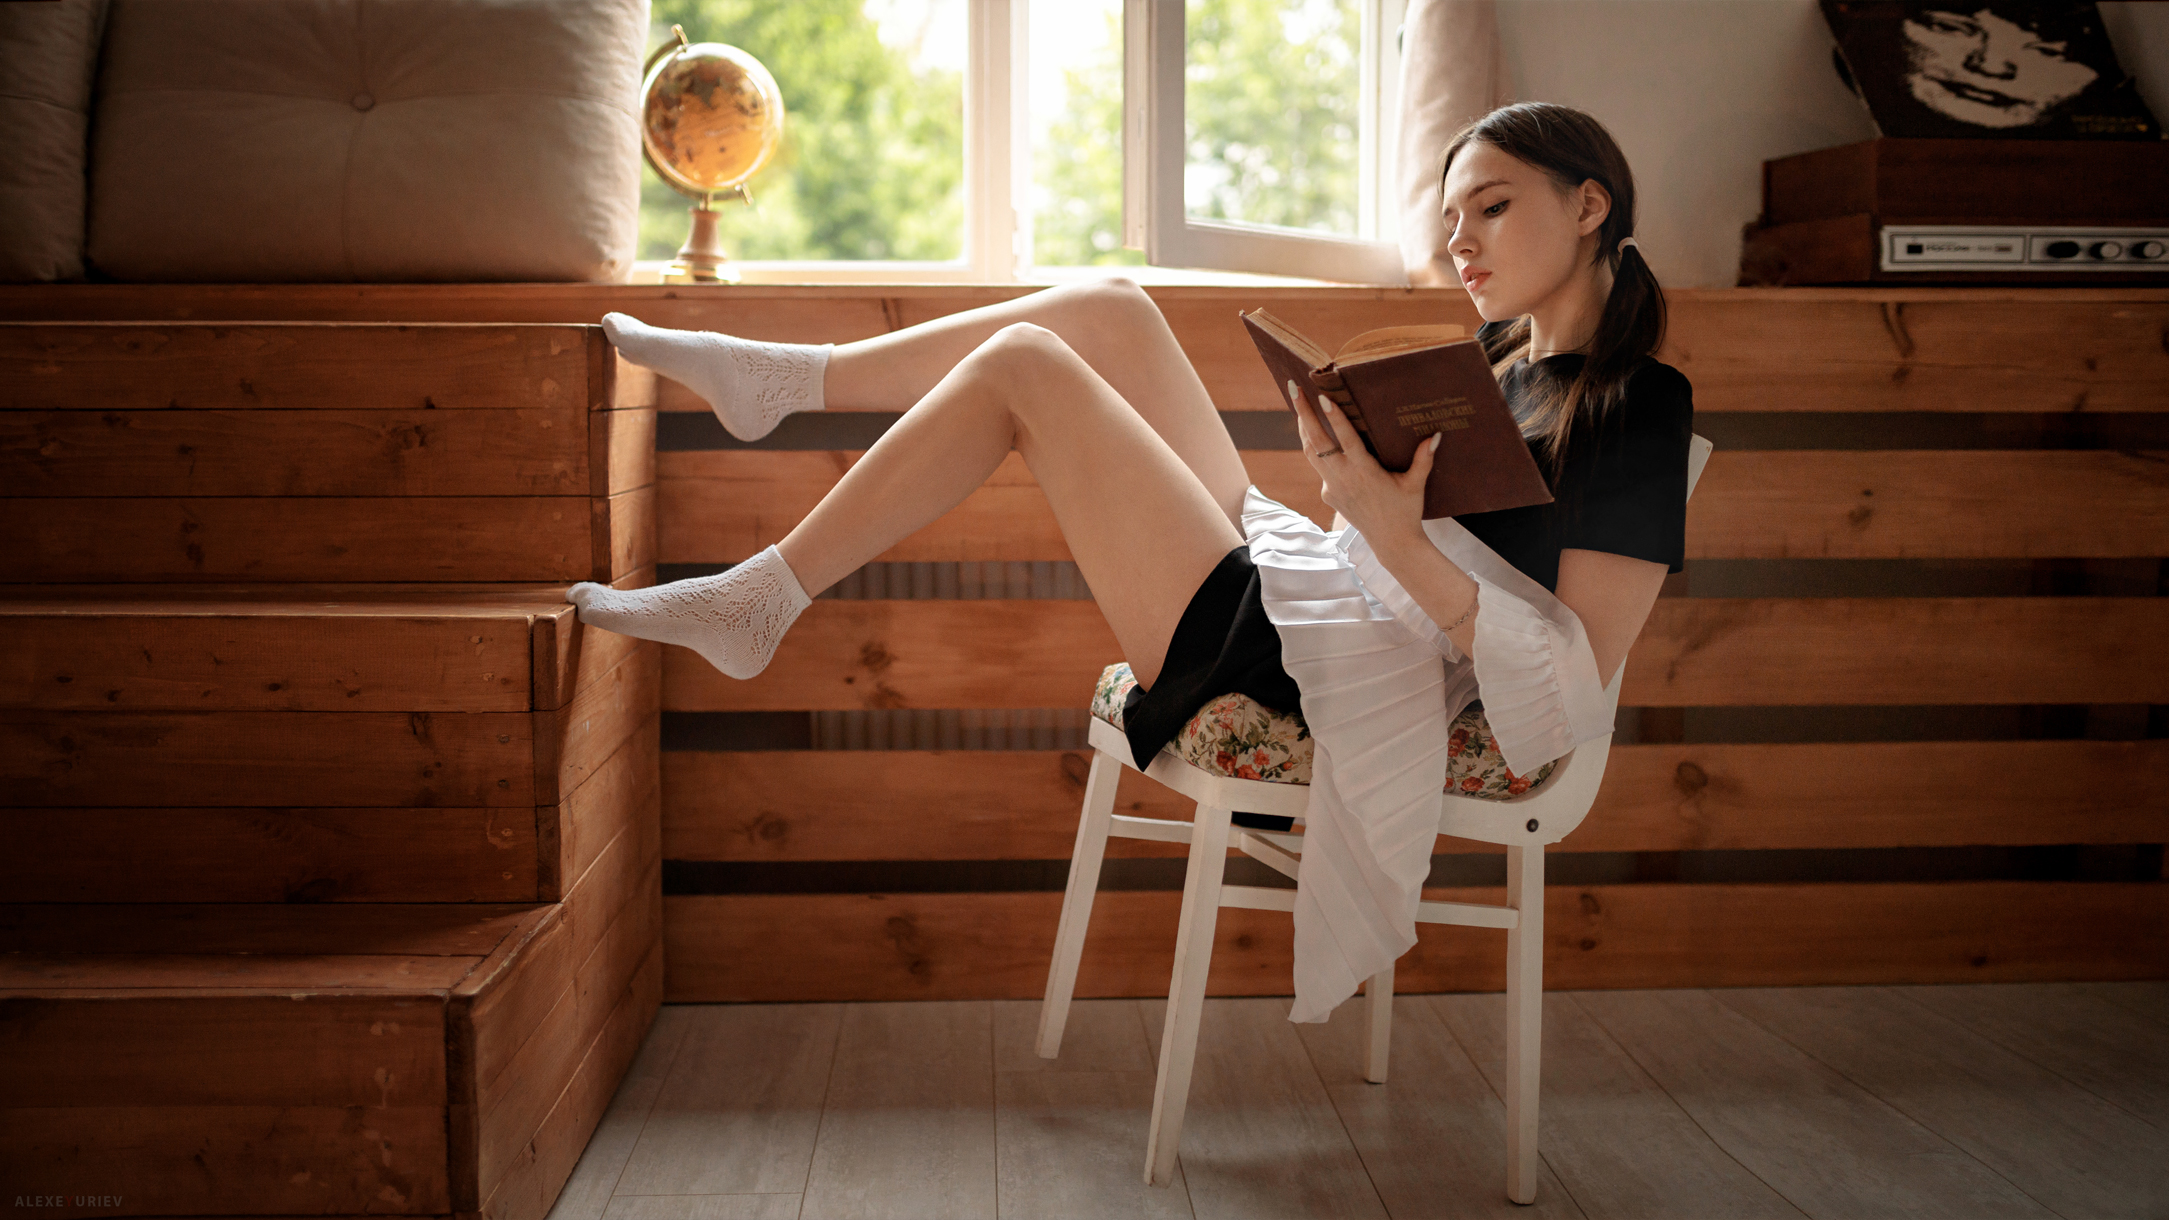 Aleksey Yuriev Women Brunette Twintails Maid Outfit Reading Relaxing Chair Socks Legs Stairs Globes  2169x1220